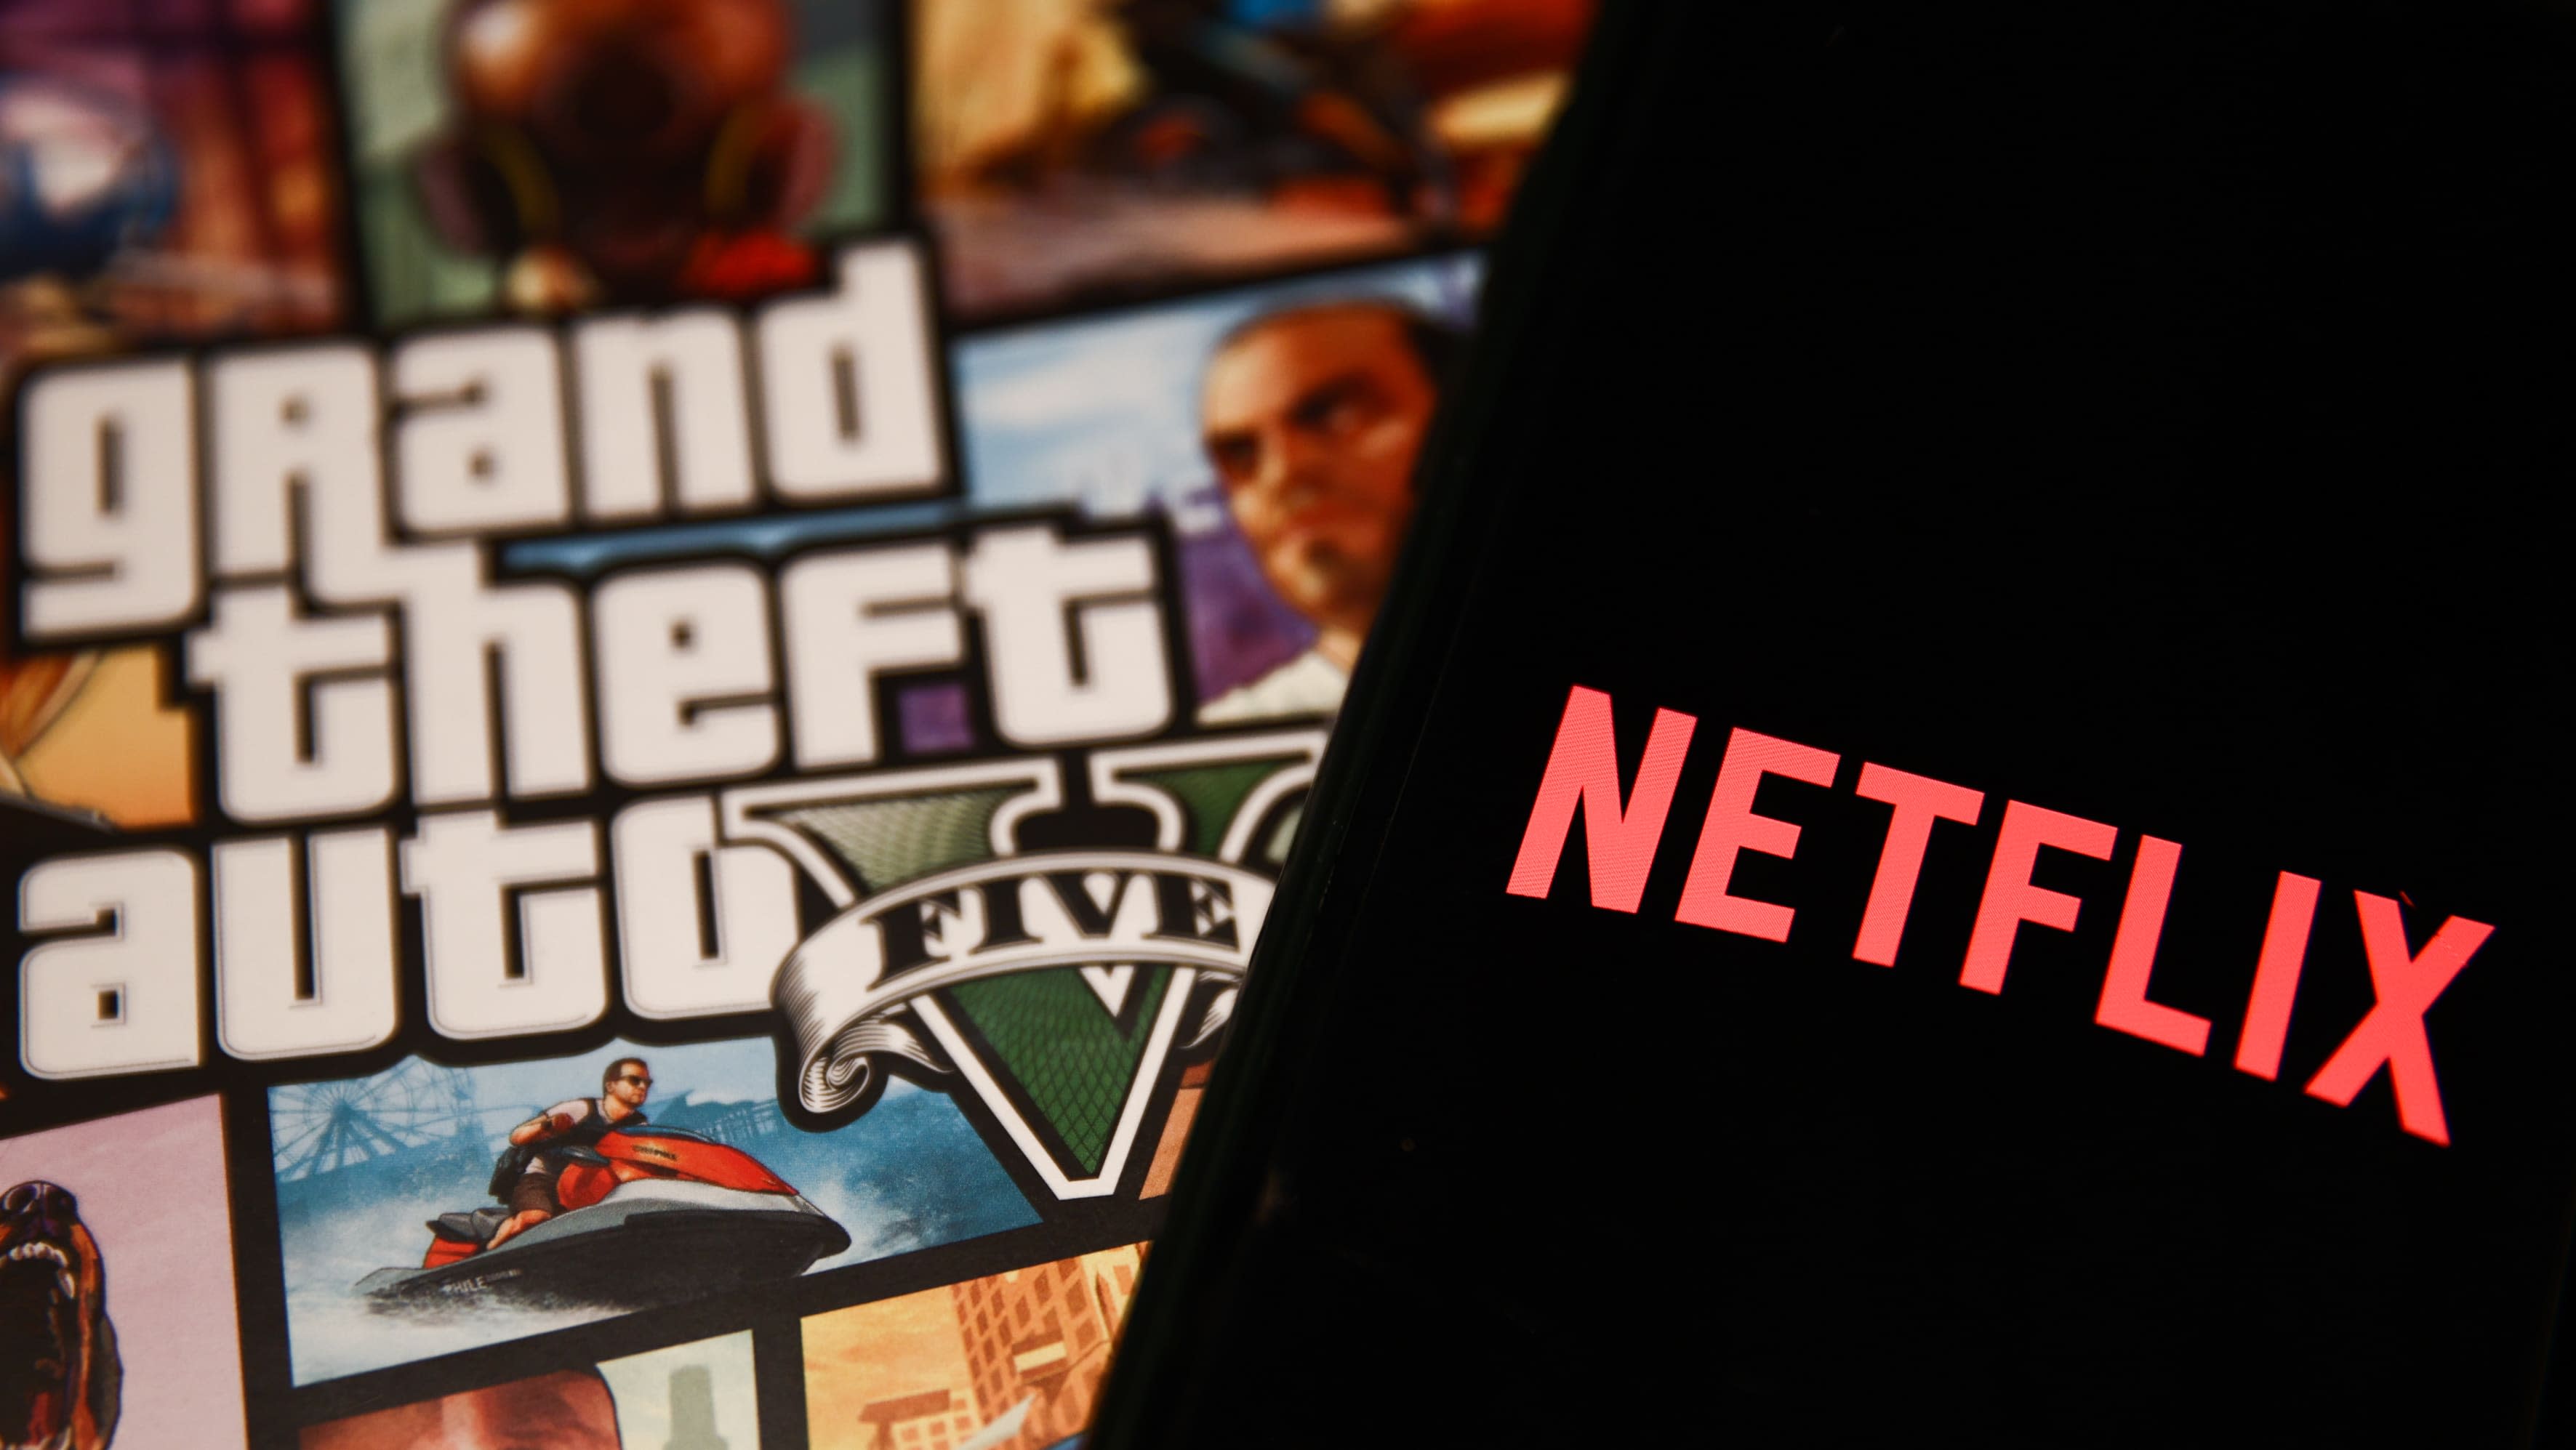 GTA Trilogy's Netflix release became streamer's most successful